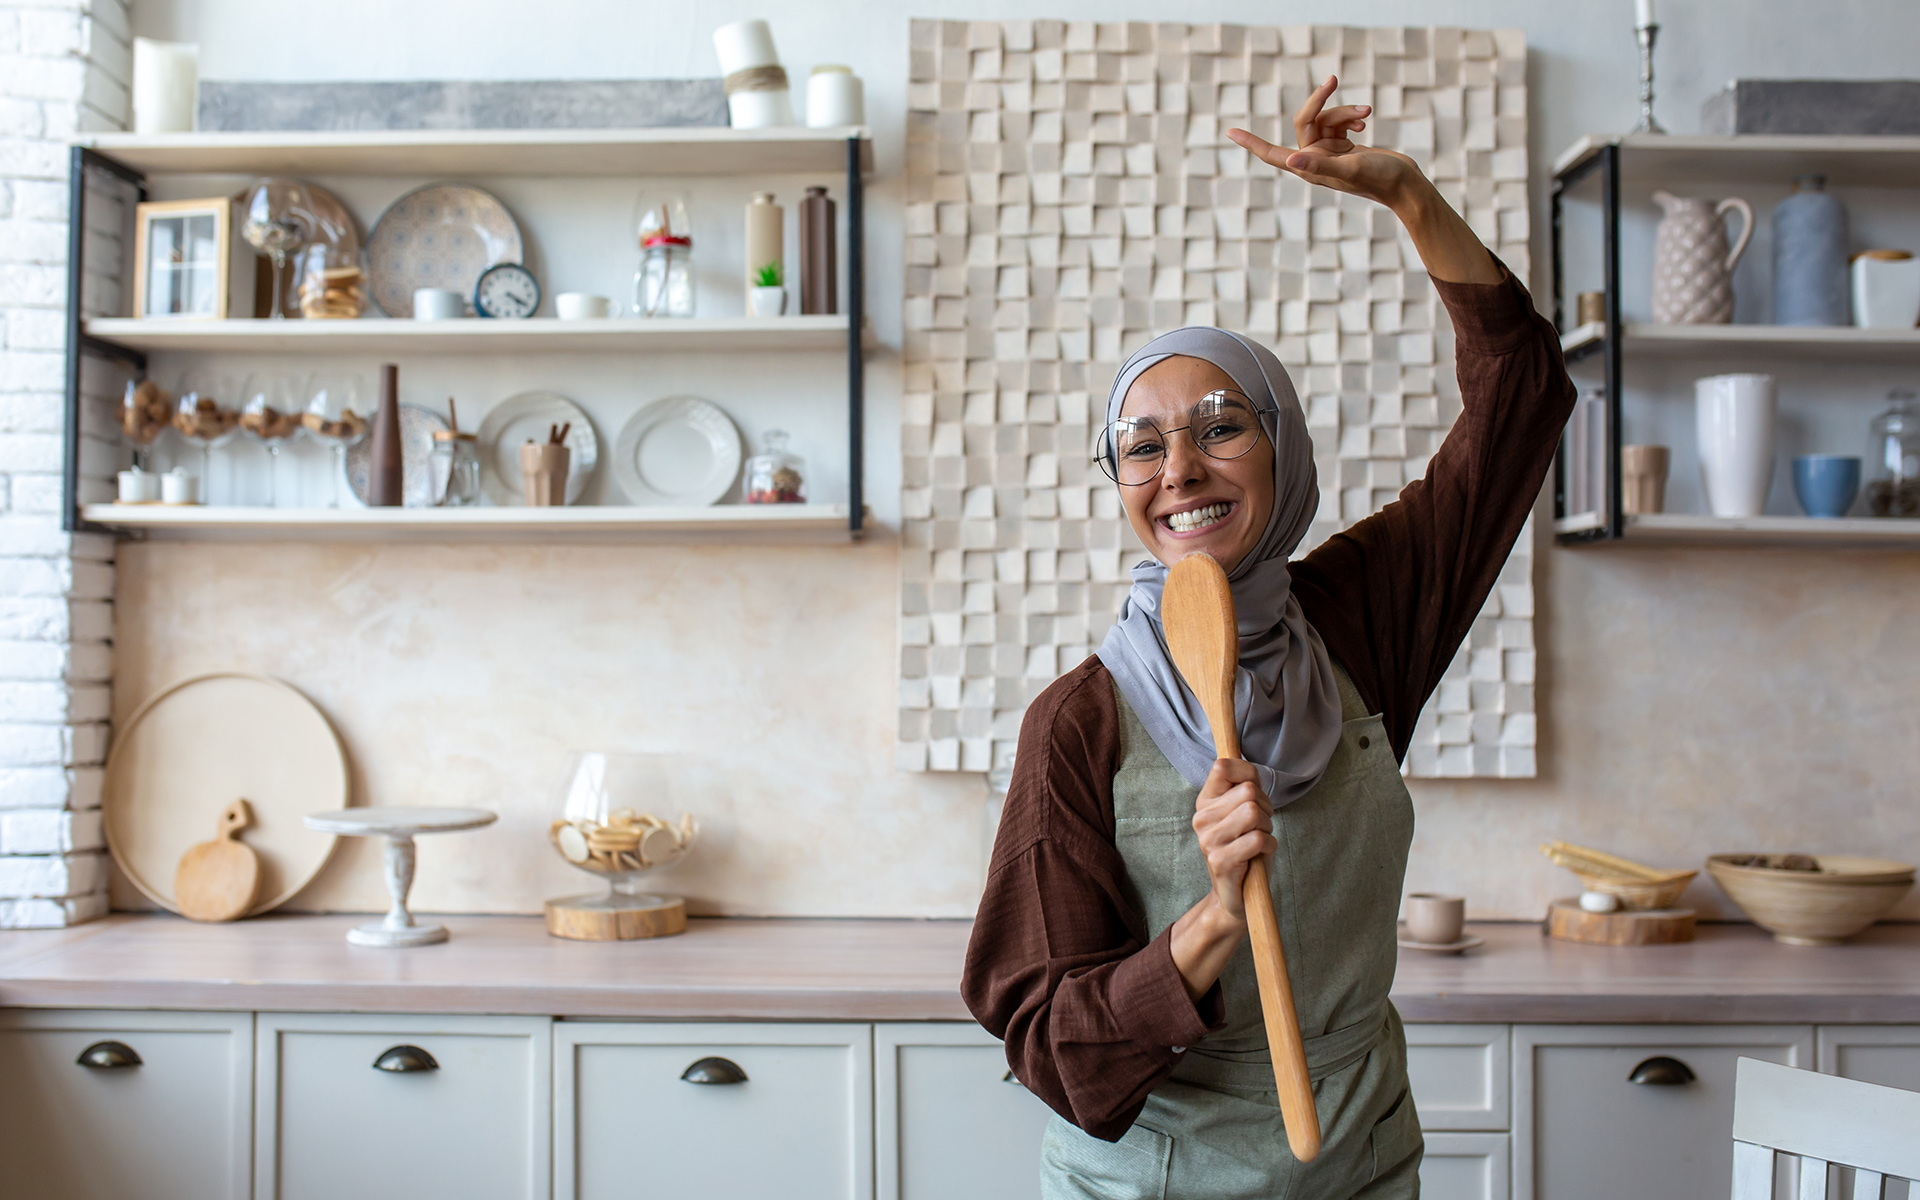 Photo of a woman in a hijab dancing in a kitchen with a joyful expression.